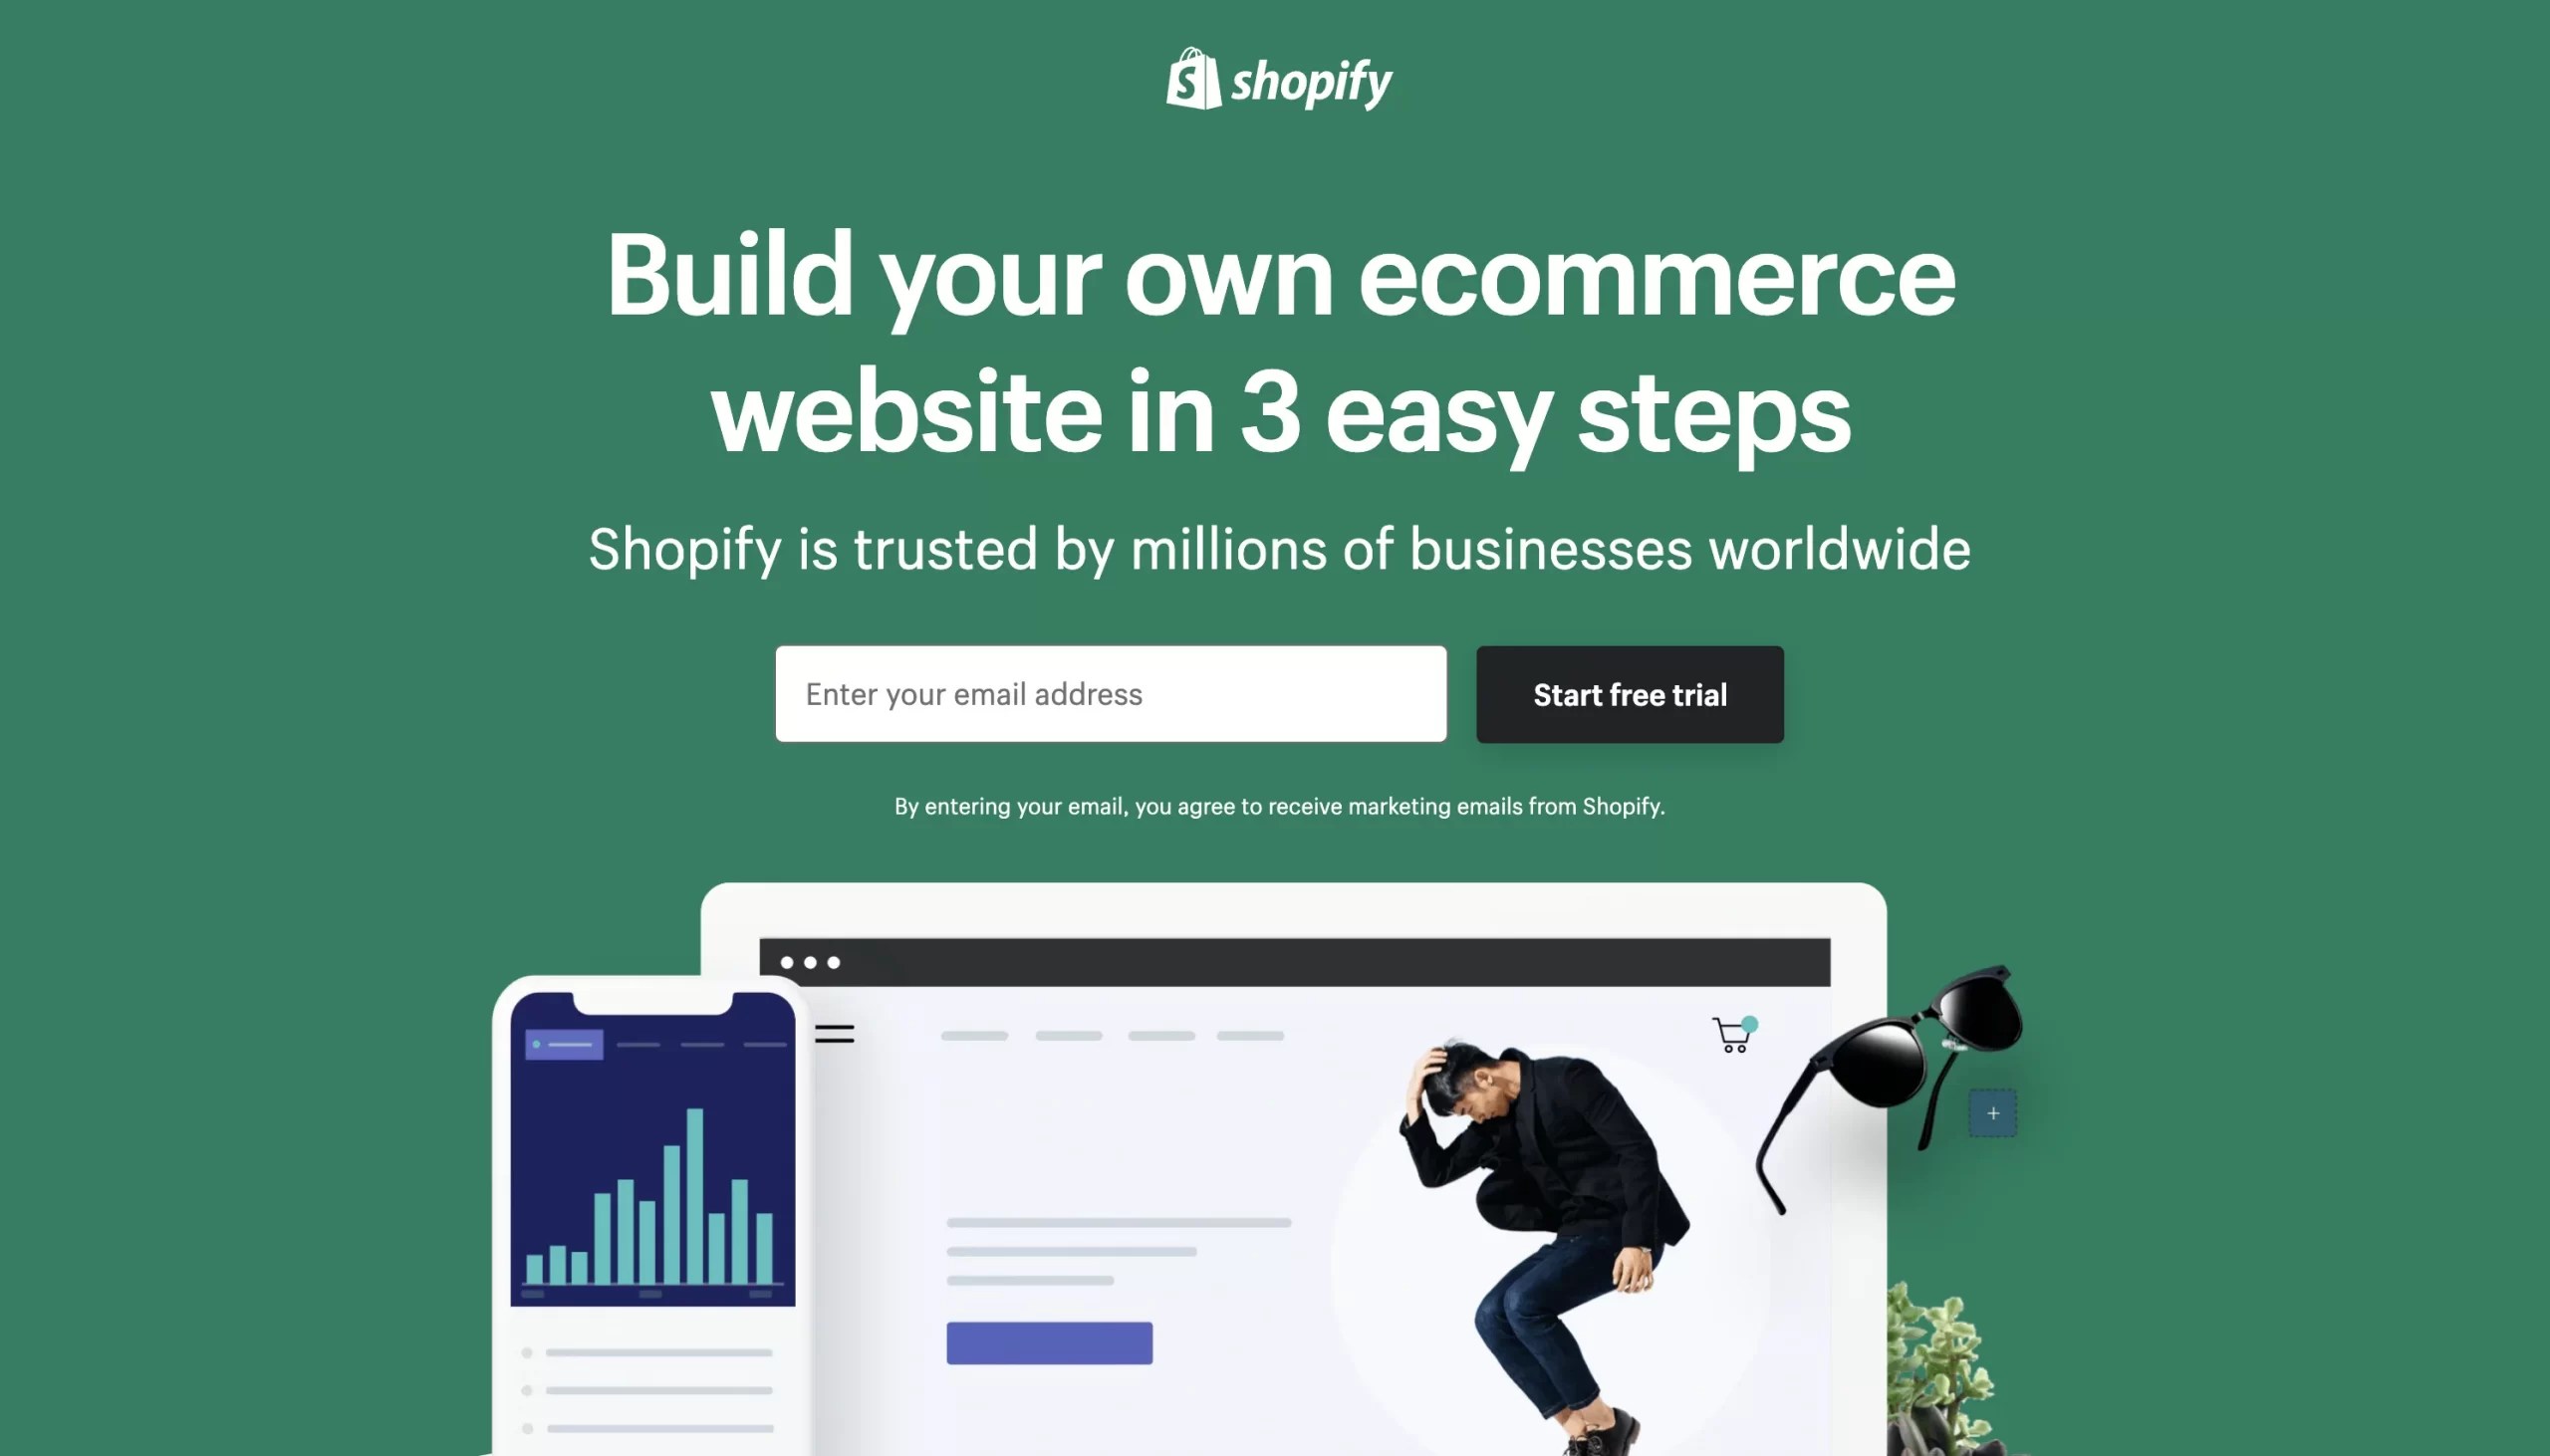 How To Setup Your Own Ecommerce Website